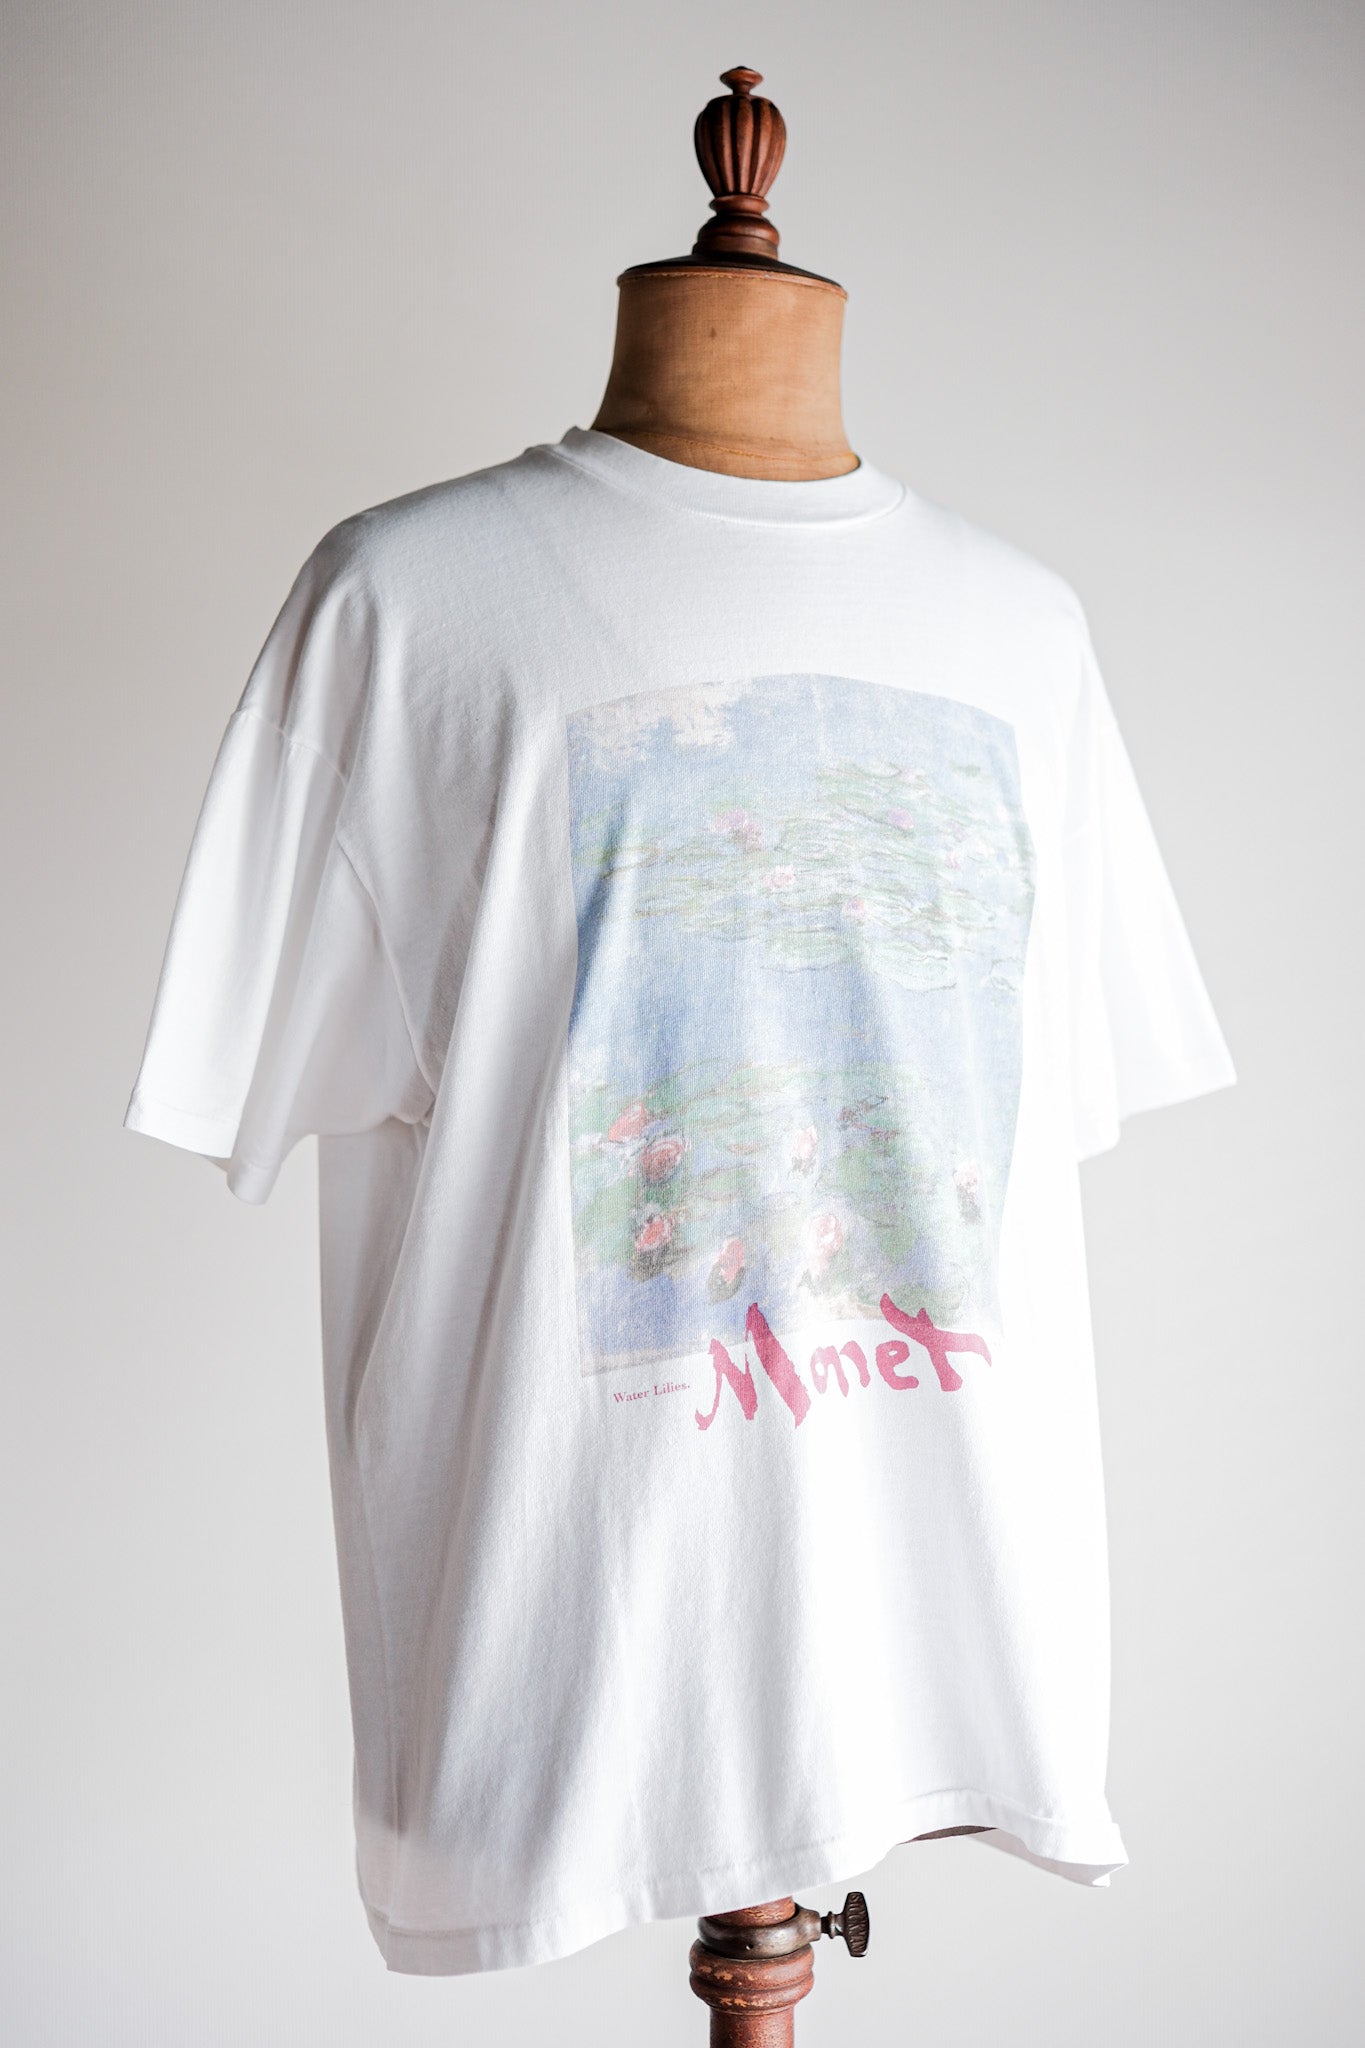 [~ 90's] Vintage Art Print T-shirt size.xl "Claude Monet" "Lys Water" "Made in U.S.A."